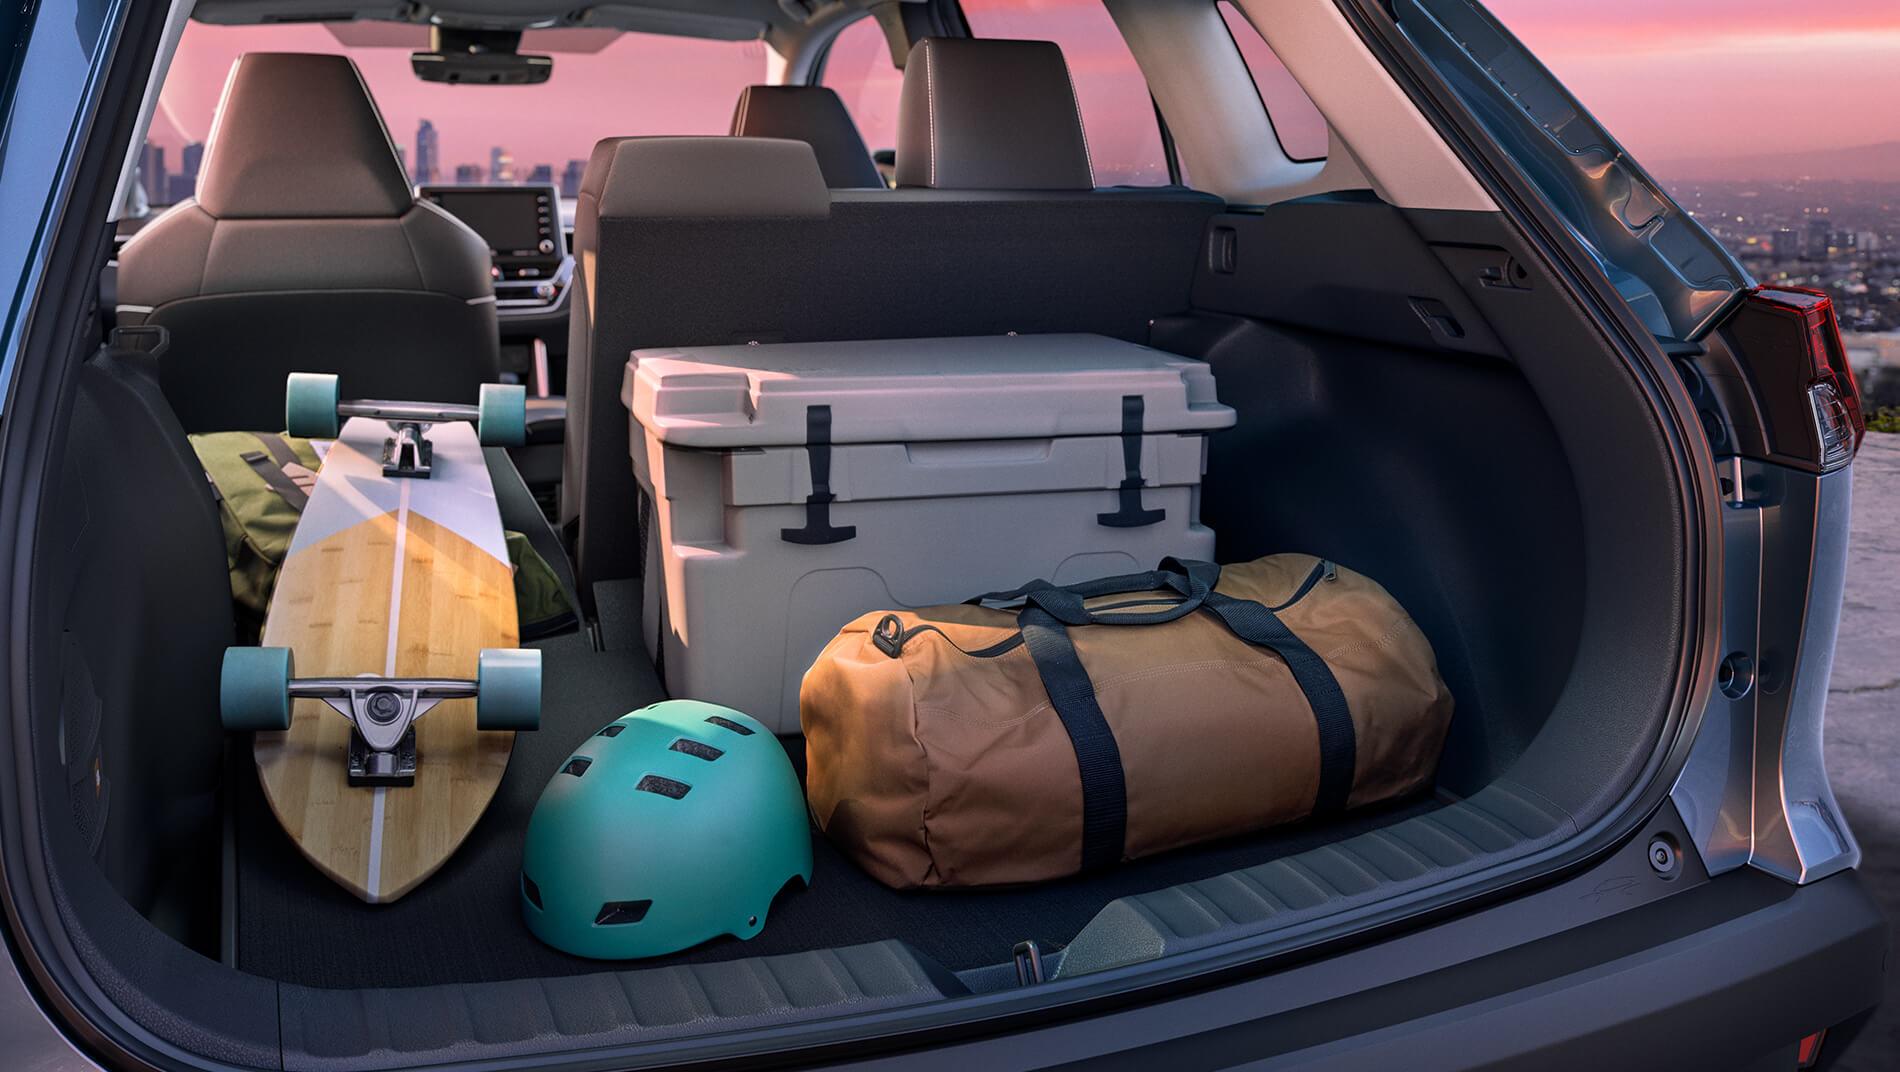 Toyota Corolla Cross large cargo area holds cooler, skateboard, and bag